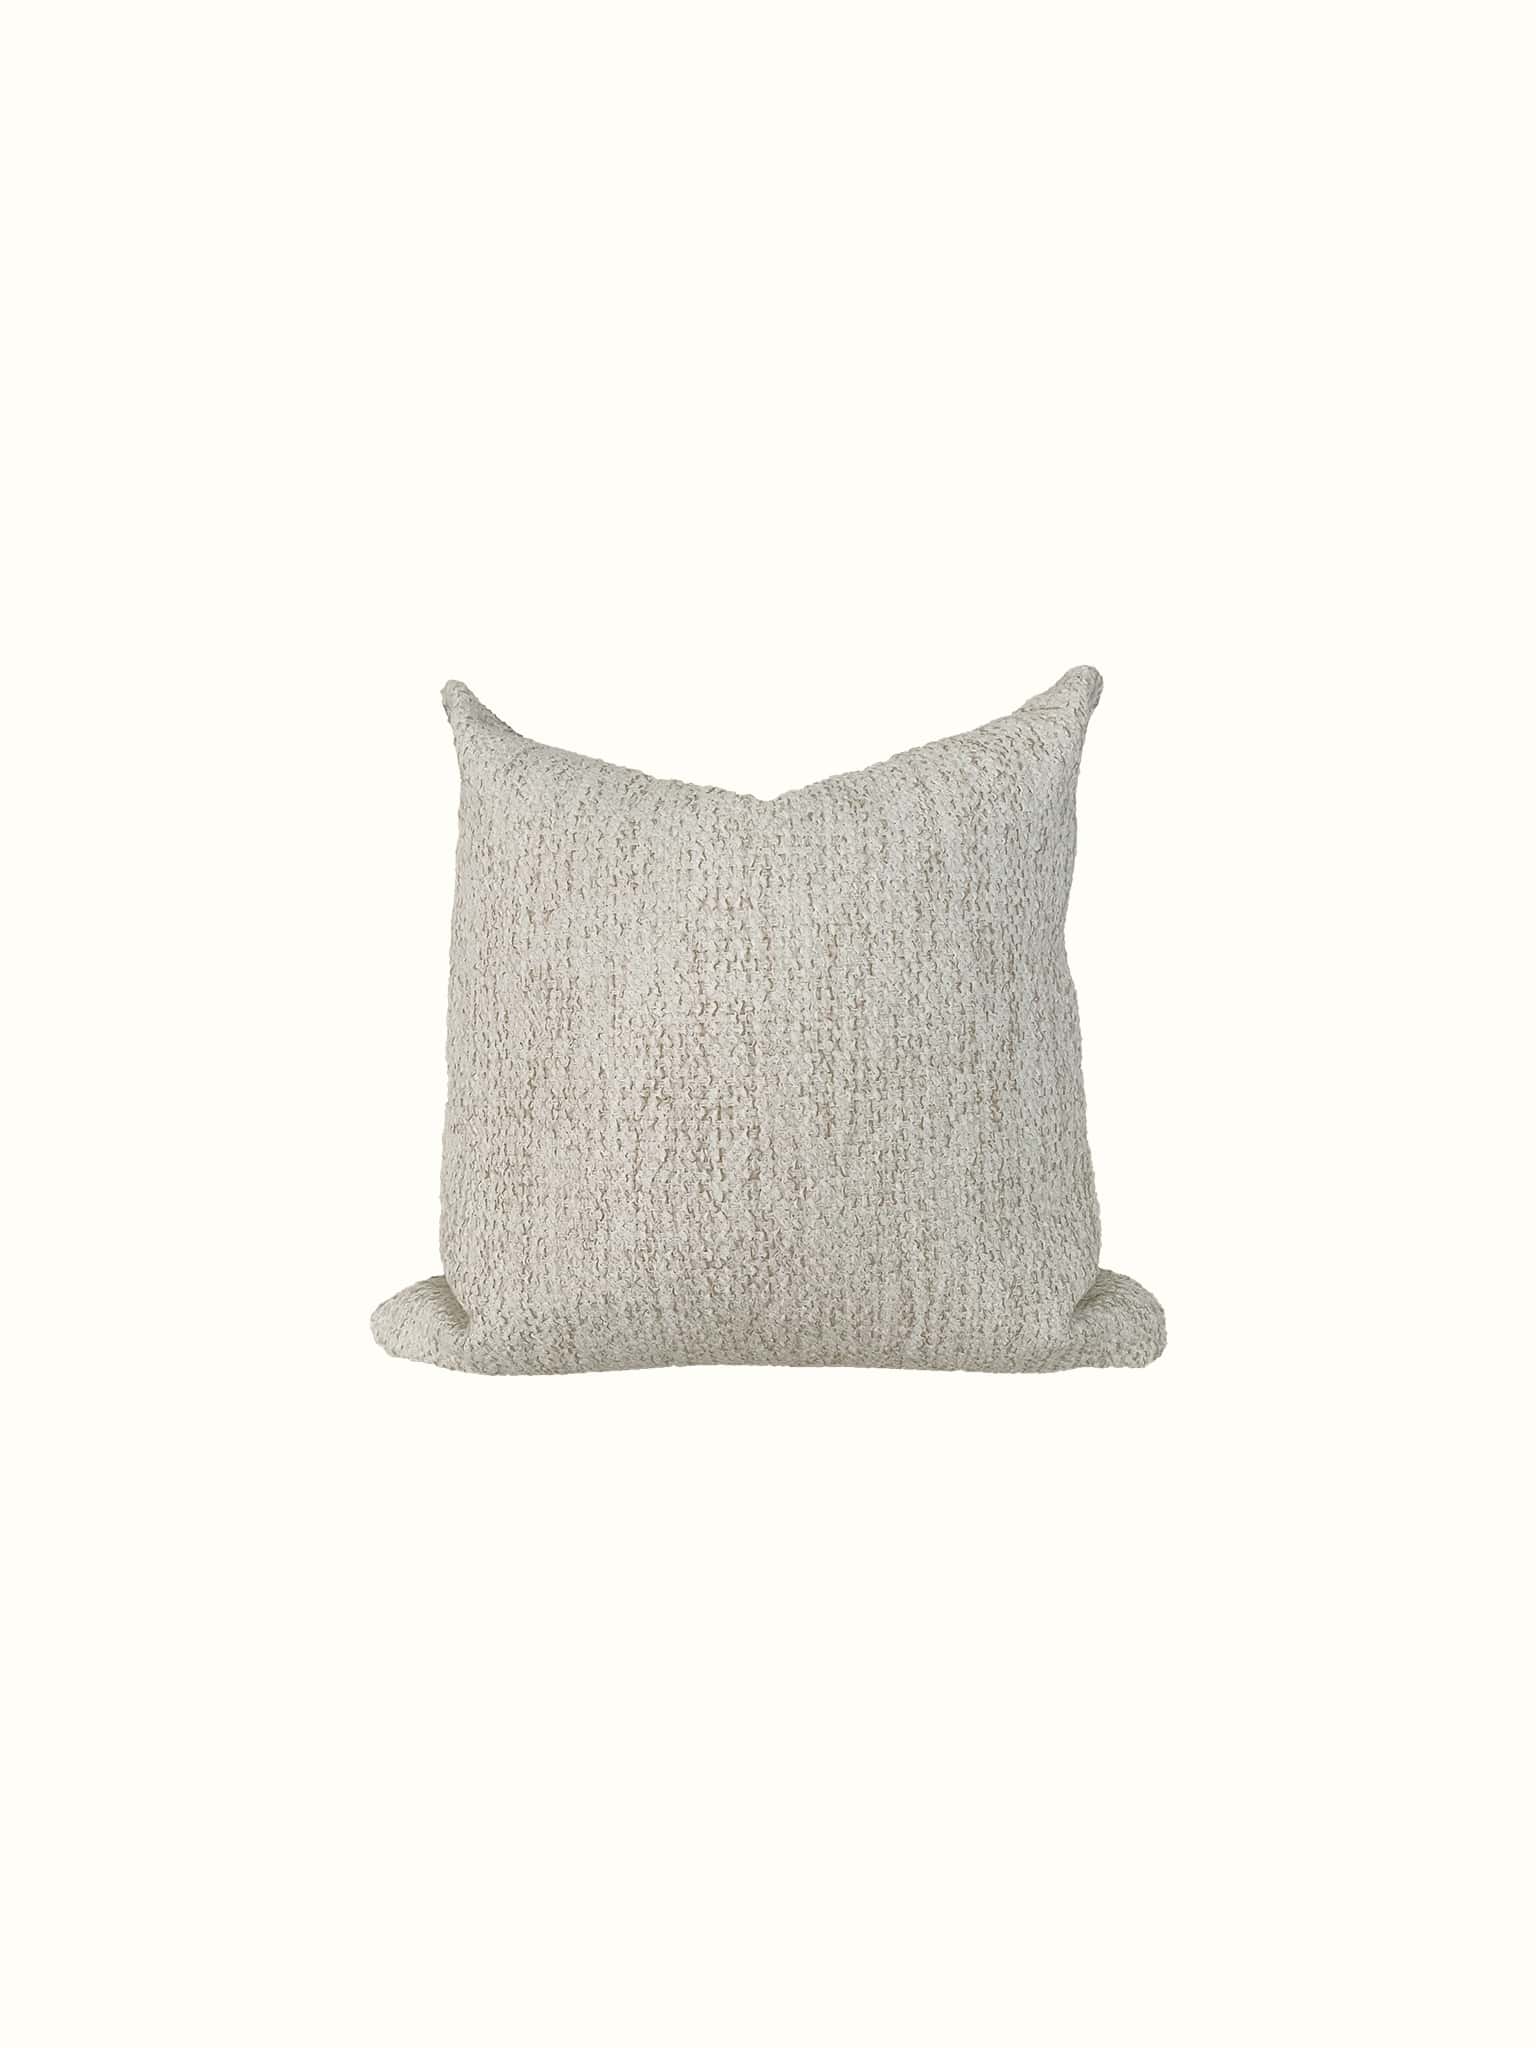 A neutral wheat colored boucle square pillow at Cielle Home